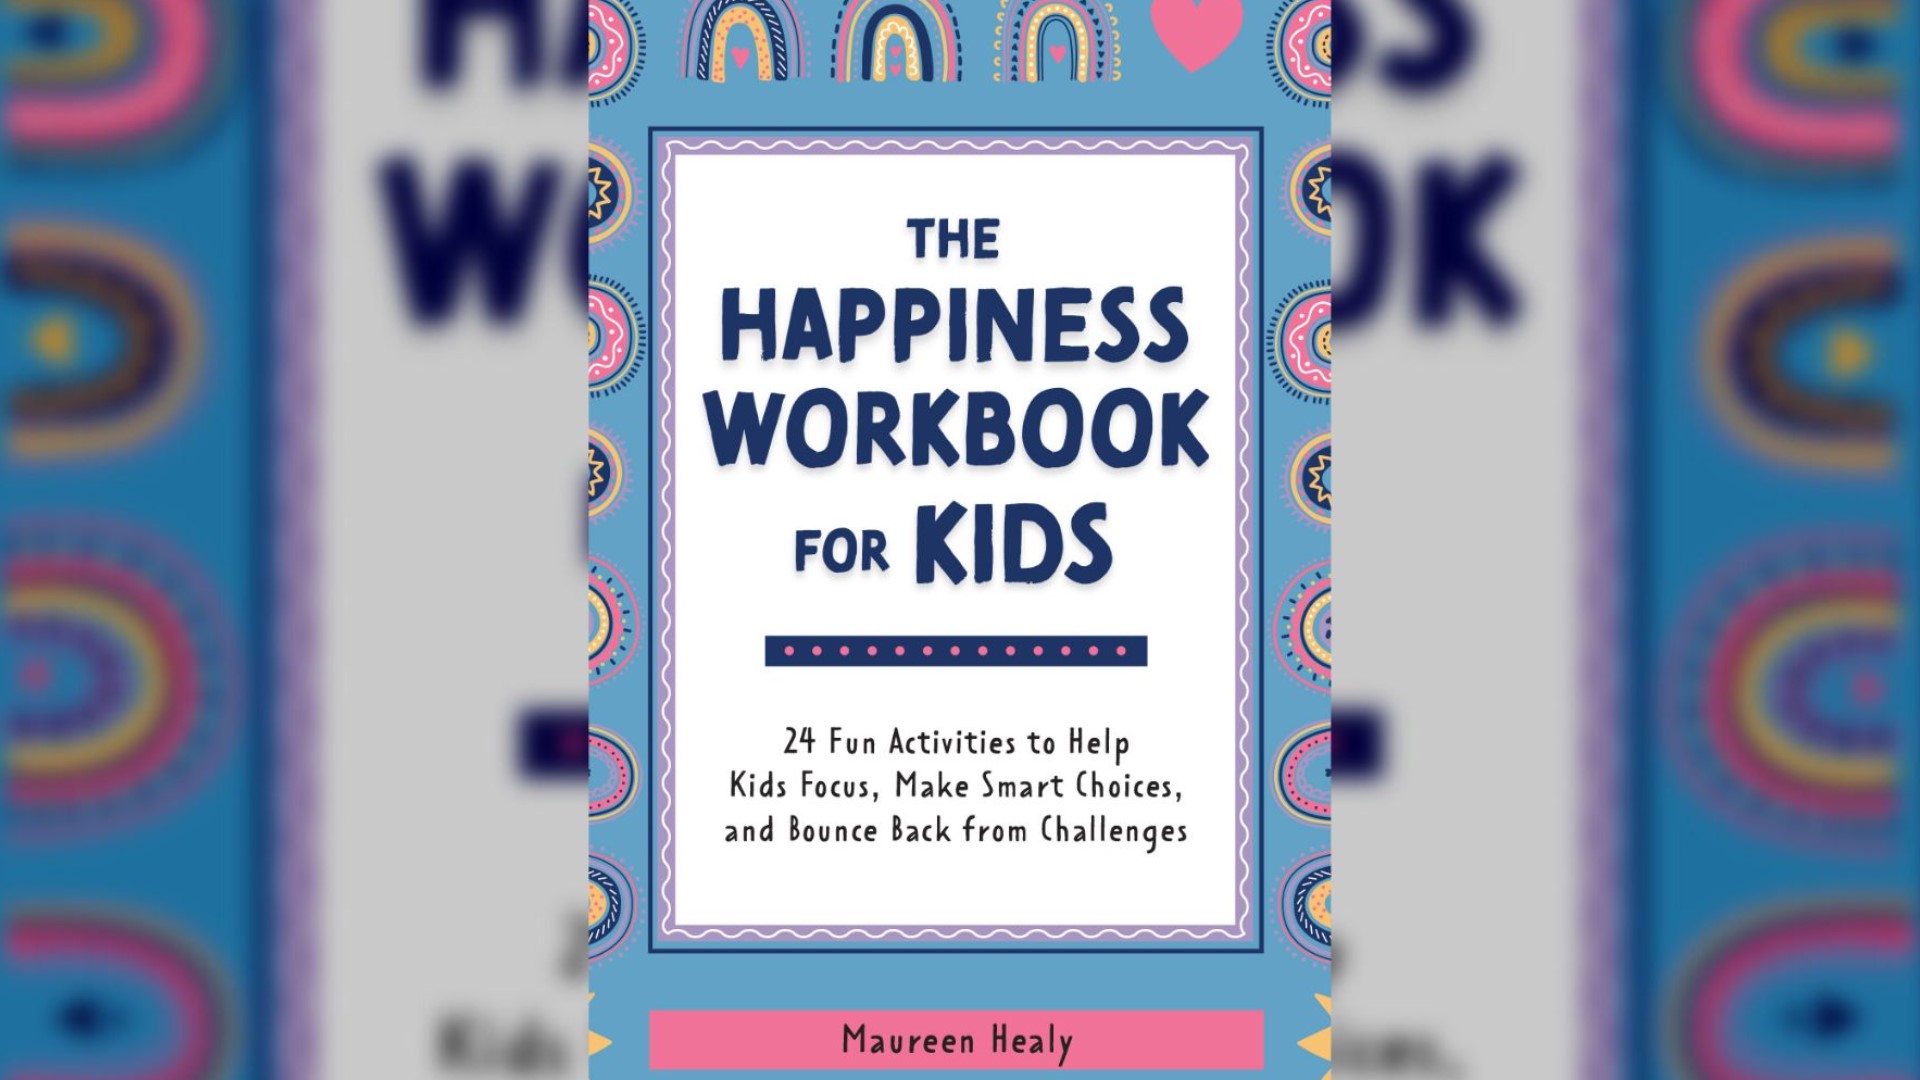 Maureen Healy's book "The Happiness Workbook" can help your child learn the secrets to happiness. #newdaynw